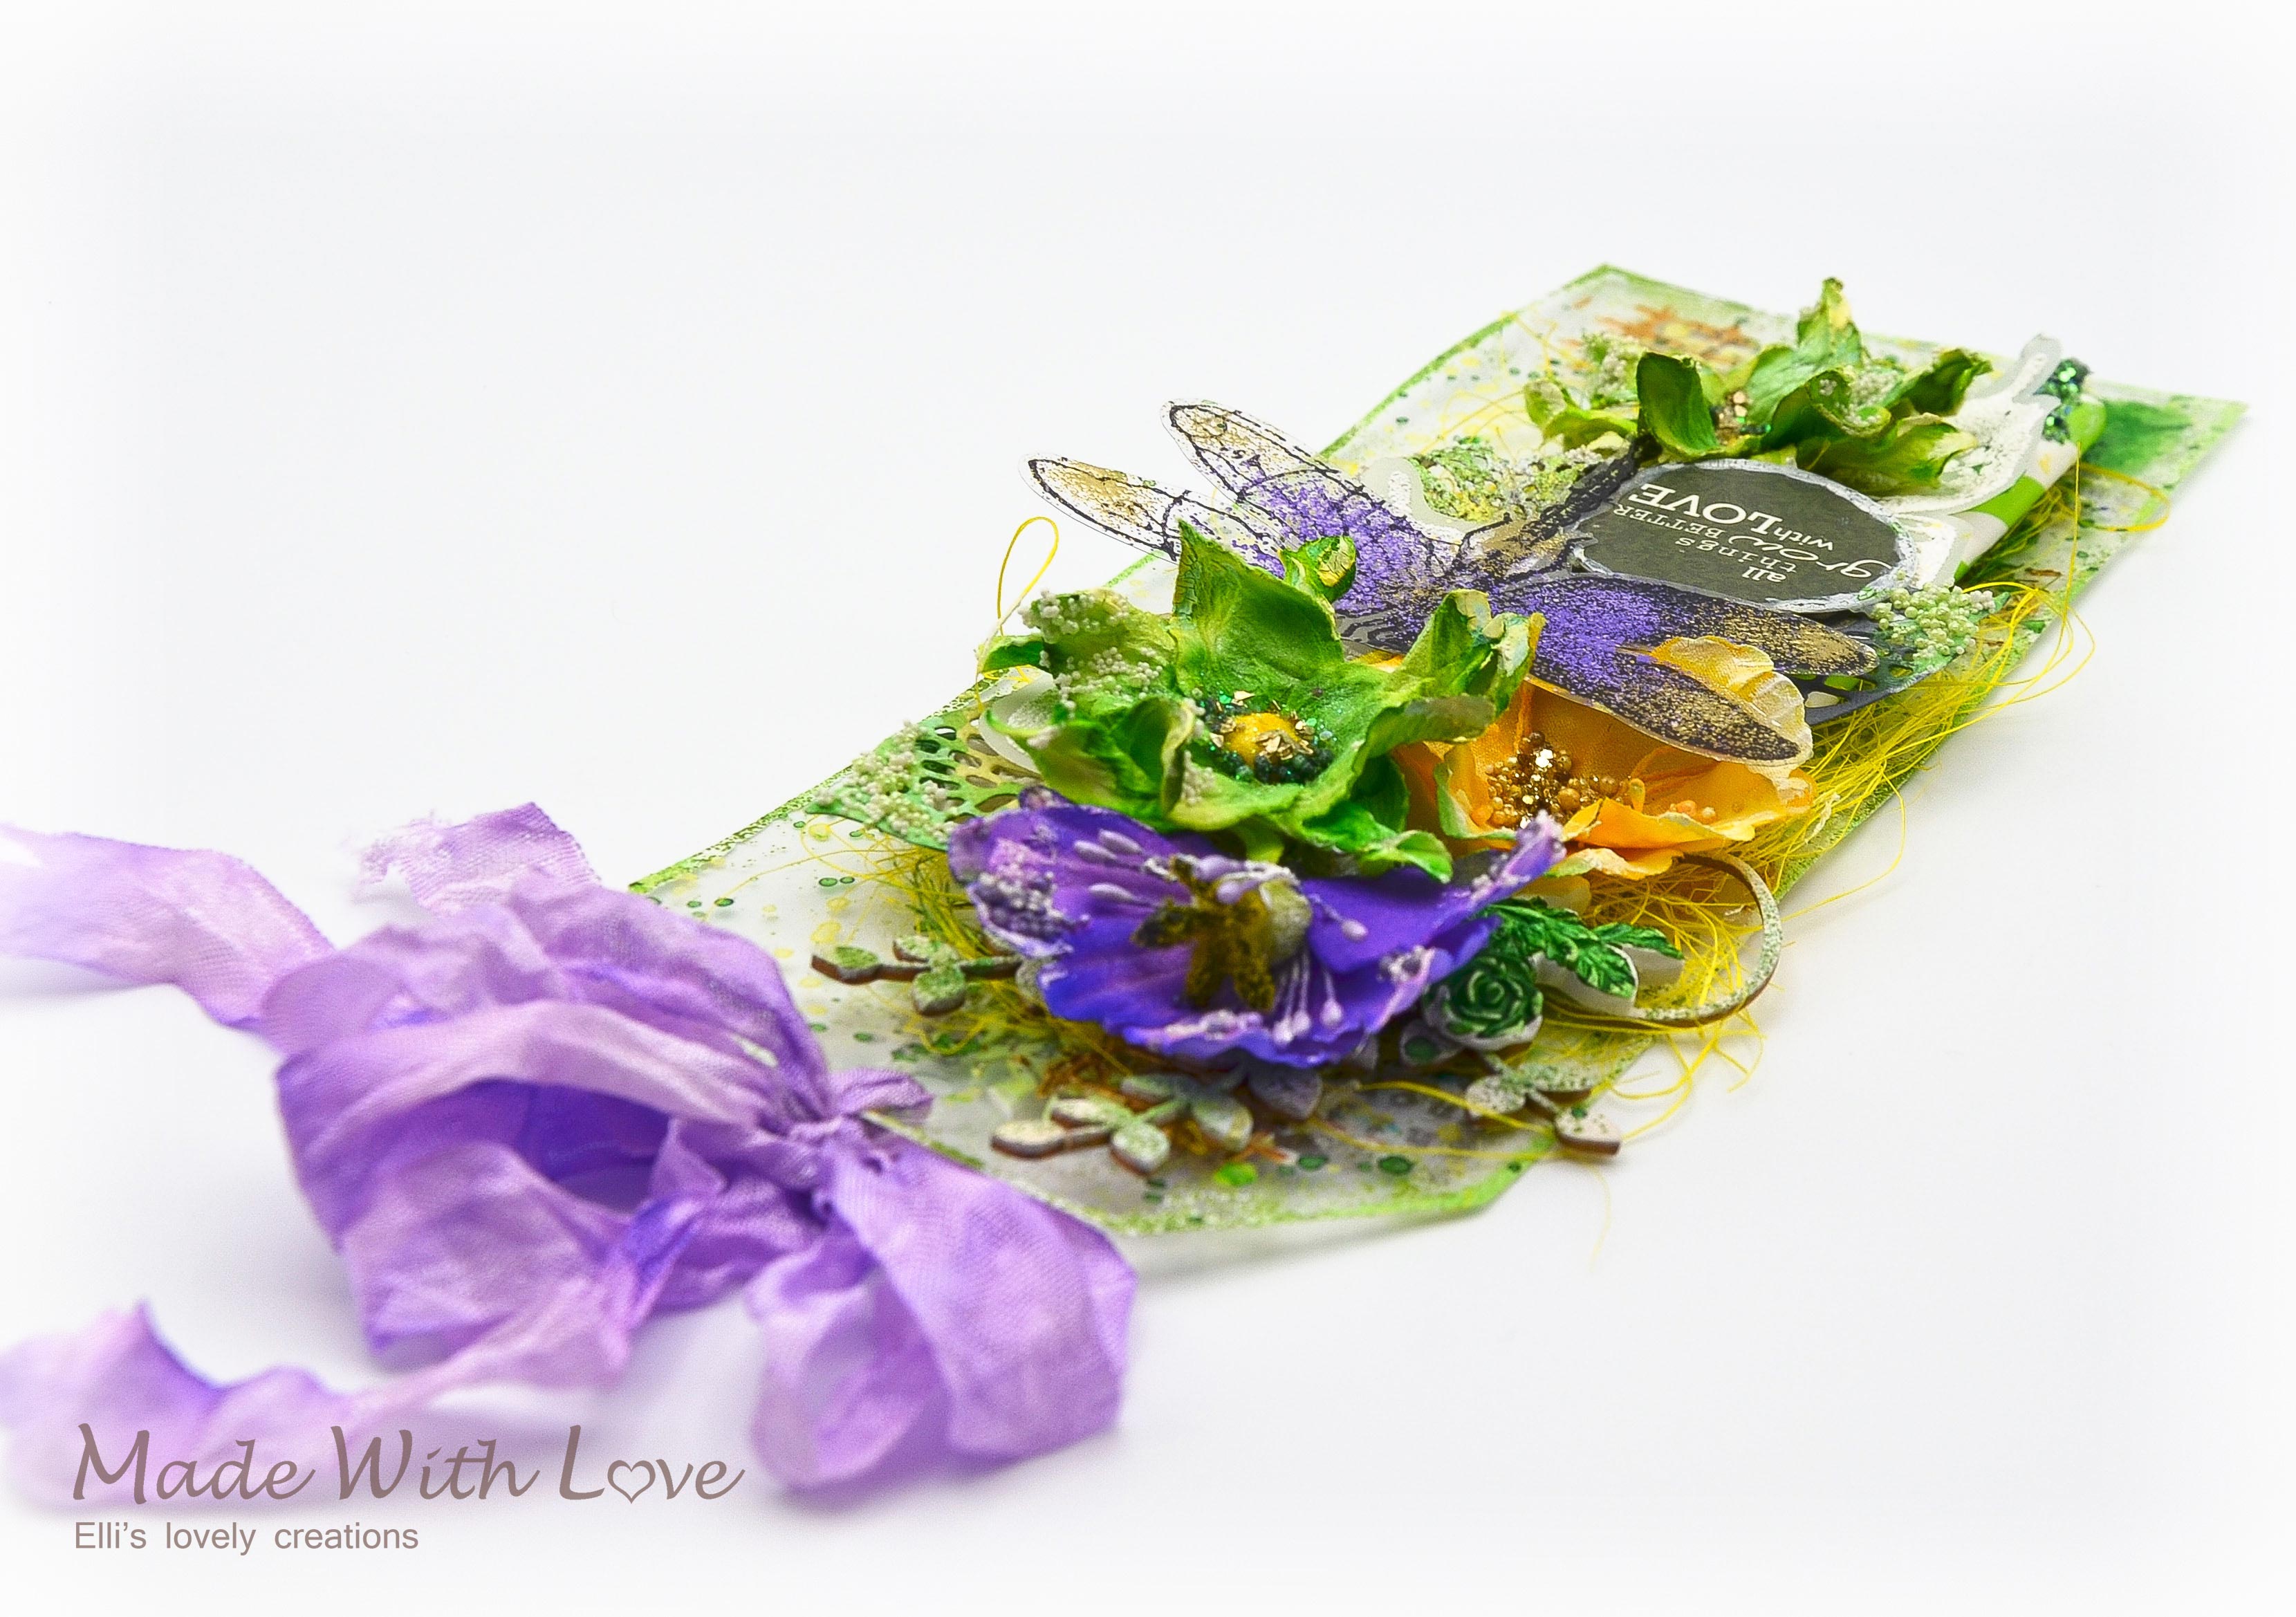 Mixed Media Spring Clear Acetate Tag Grow With Love 17